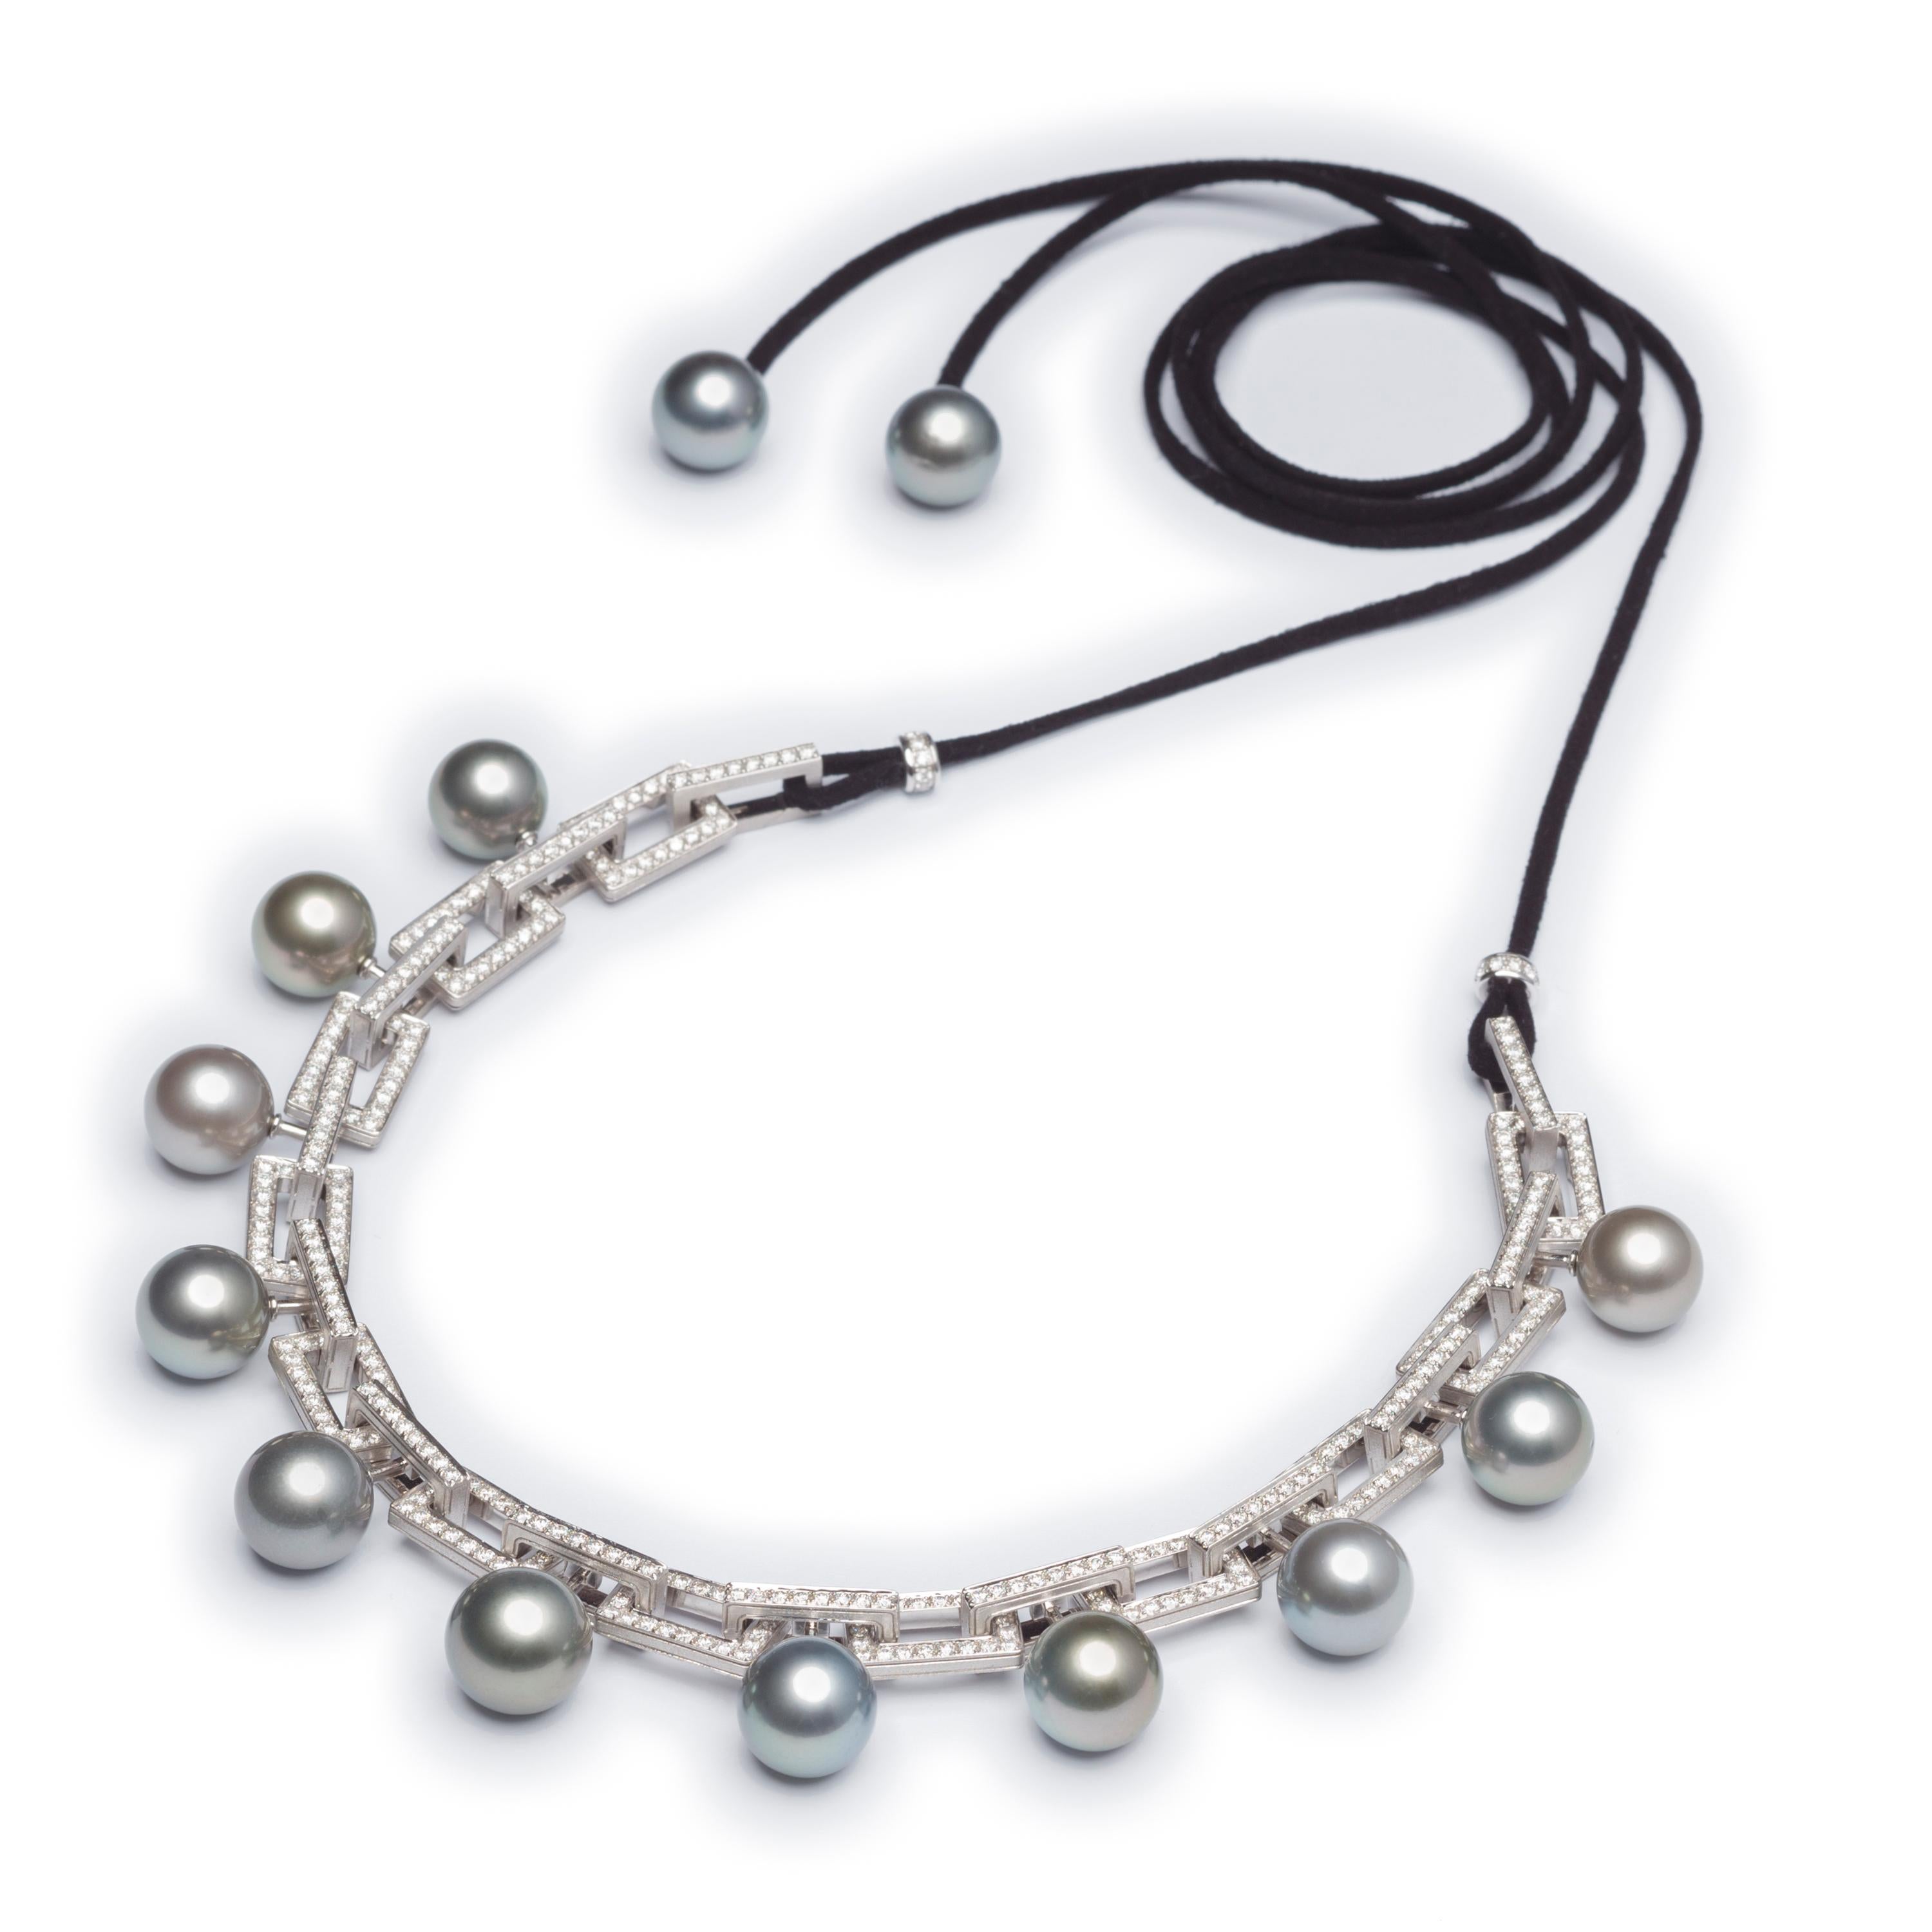 Collection:  Ode to Mother Oyster

Title: Rock & Roll Pearls

Juxtaposition has a wonderful way of allowing each to shine in equal parts and that is exactly what our Rock & Roll Pearl Choker & Bracelet has achieved.  With Solid diamond studded chain